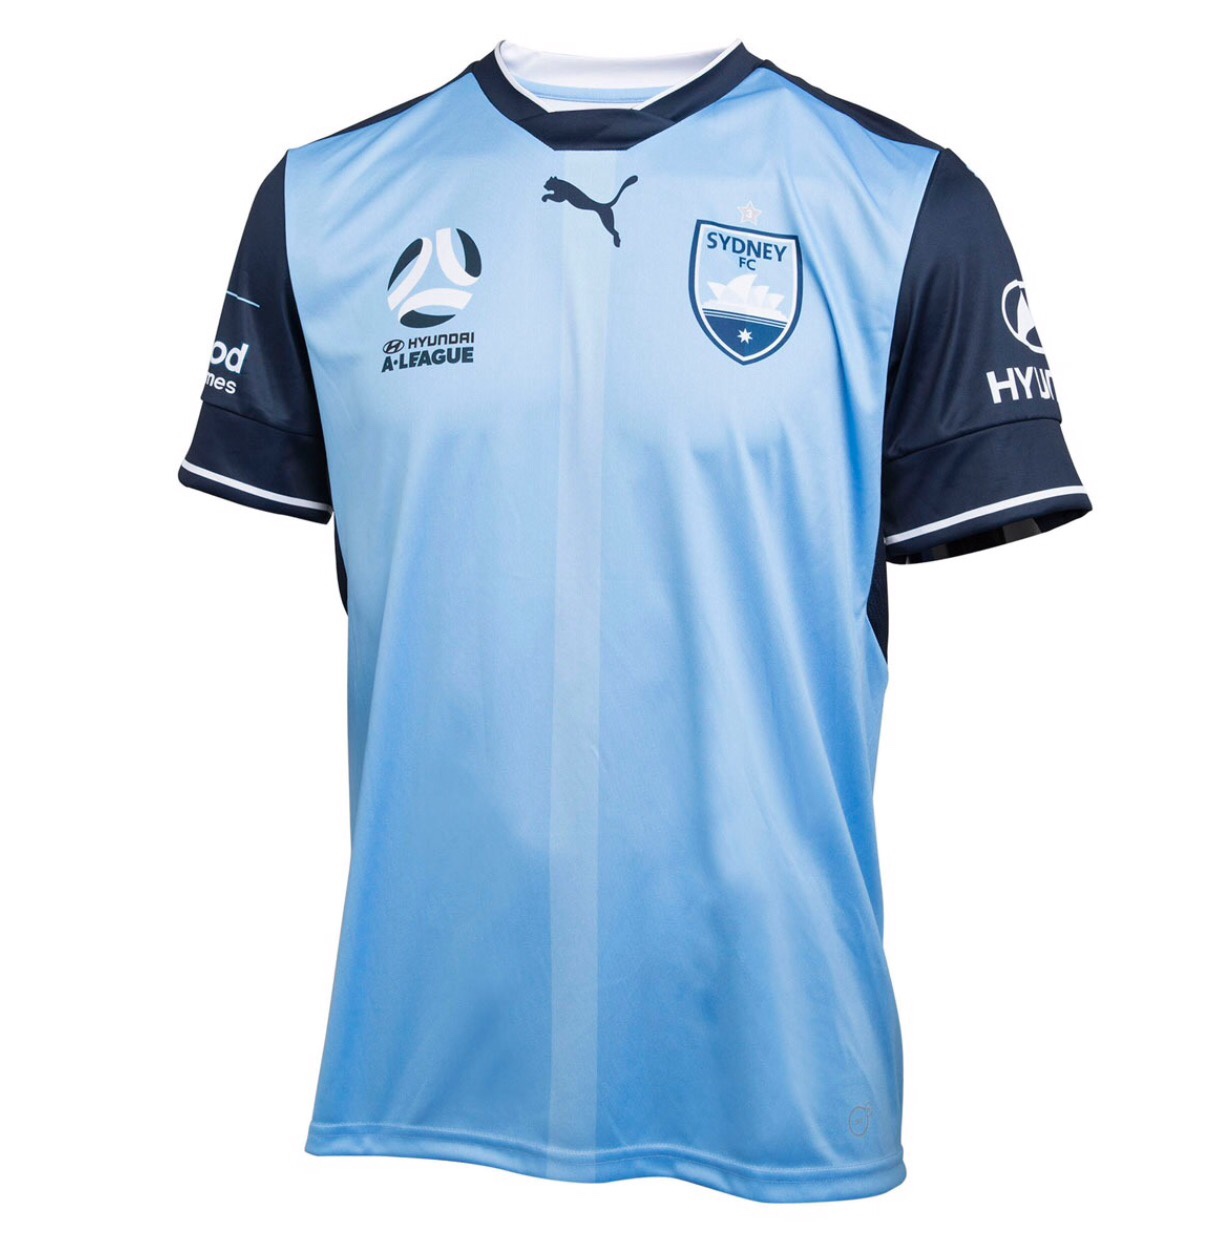 Sydney FC Home Jersey 17/18 - The 